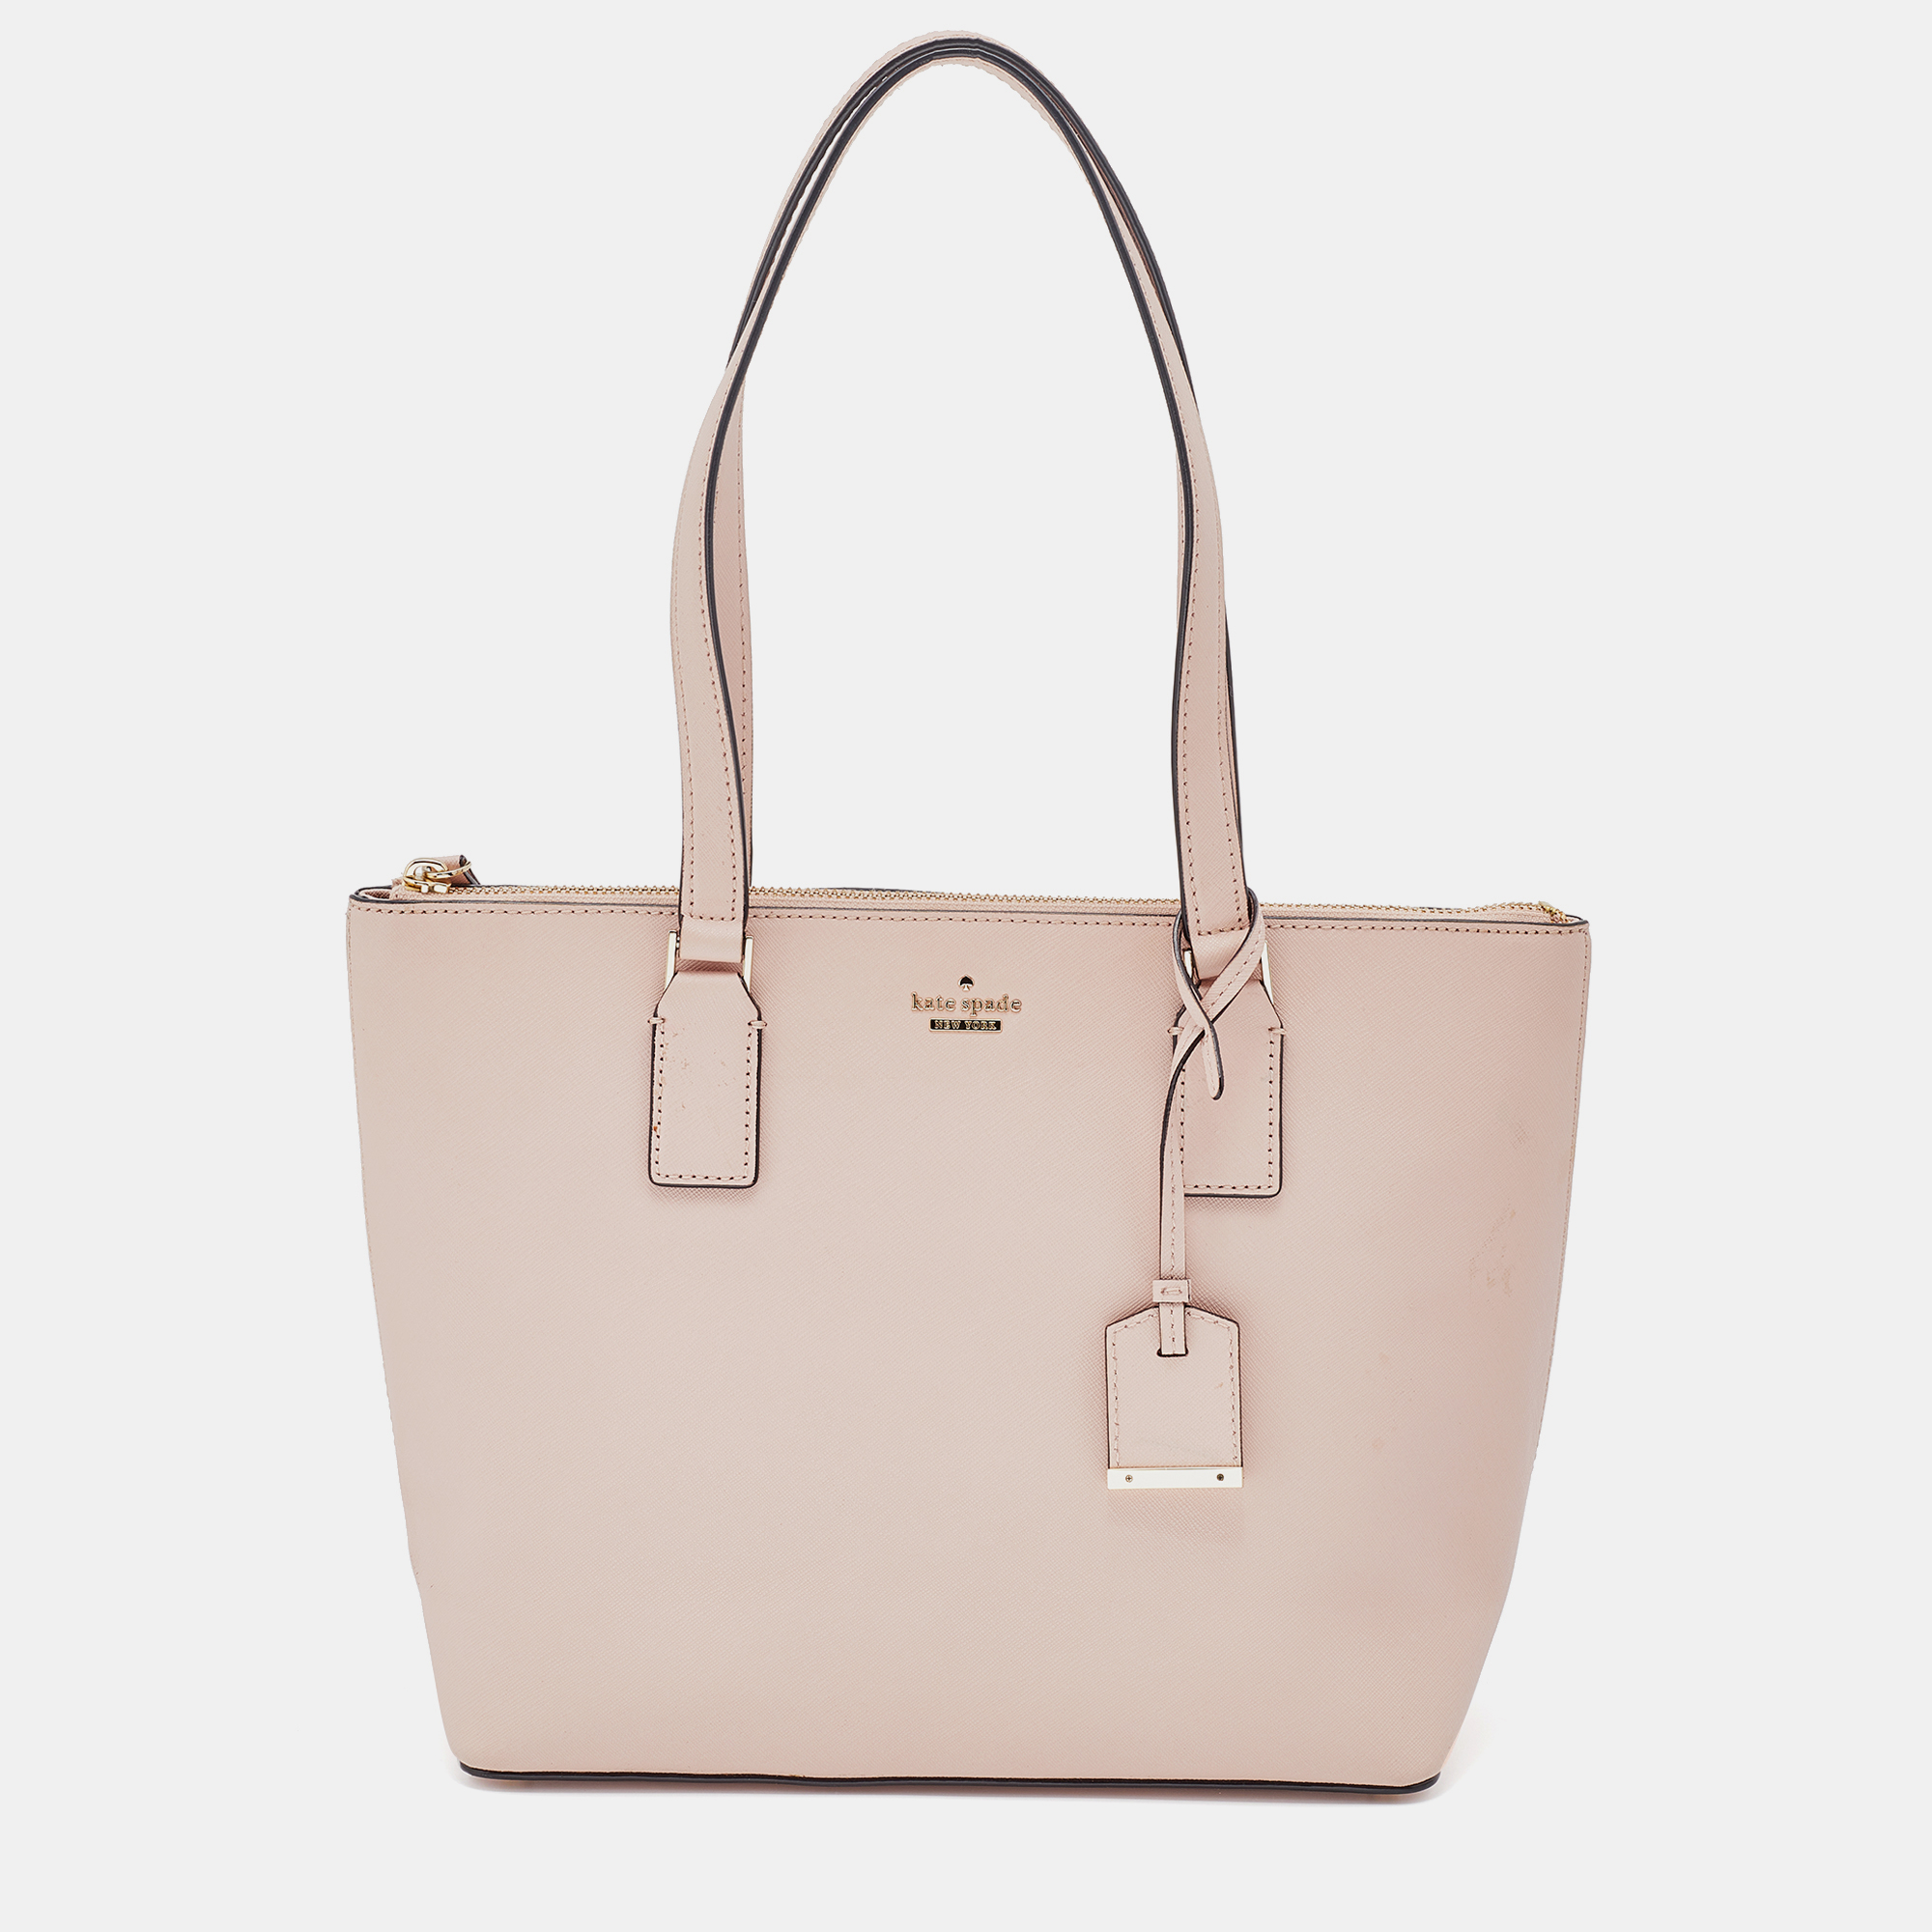 Pre-owned Kate Spade Pink Saffiano Leather Top Zip Tote